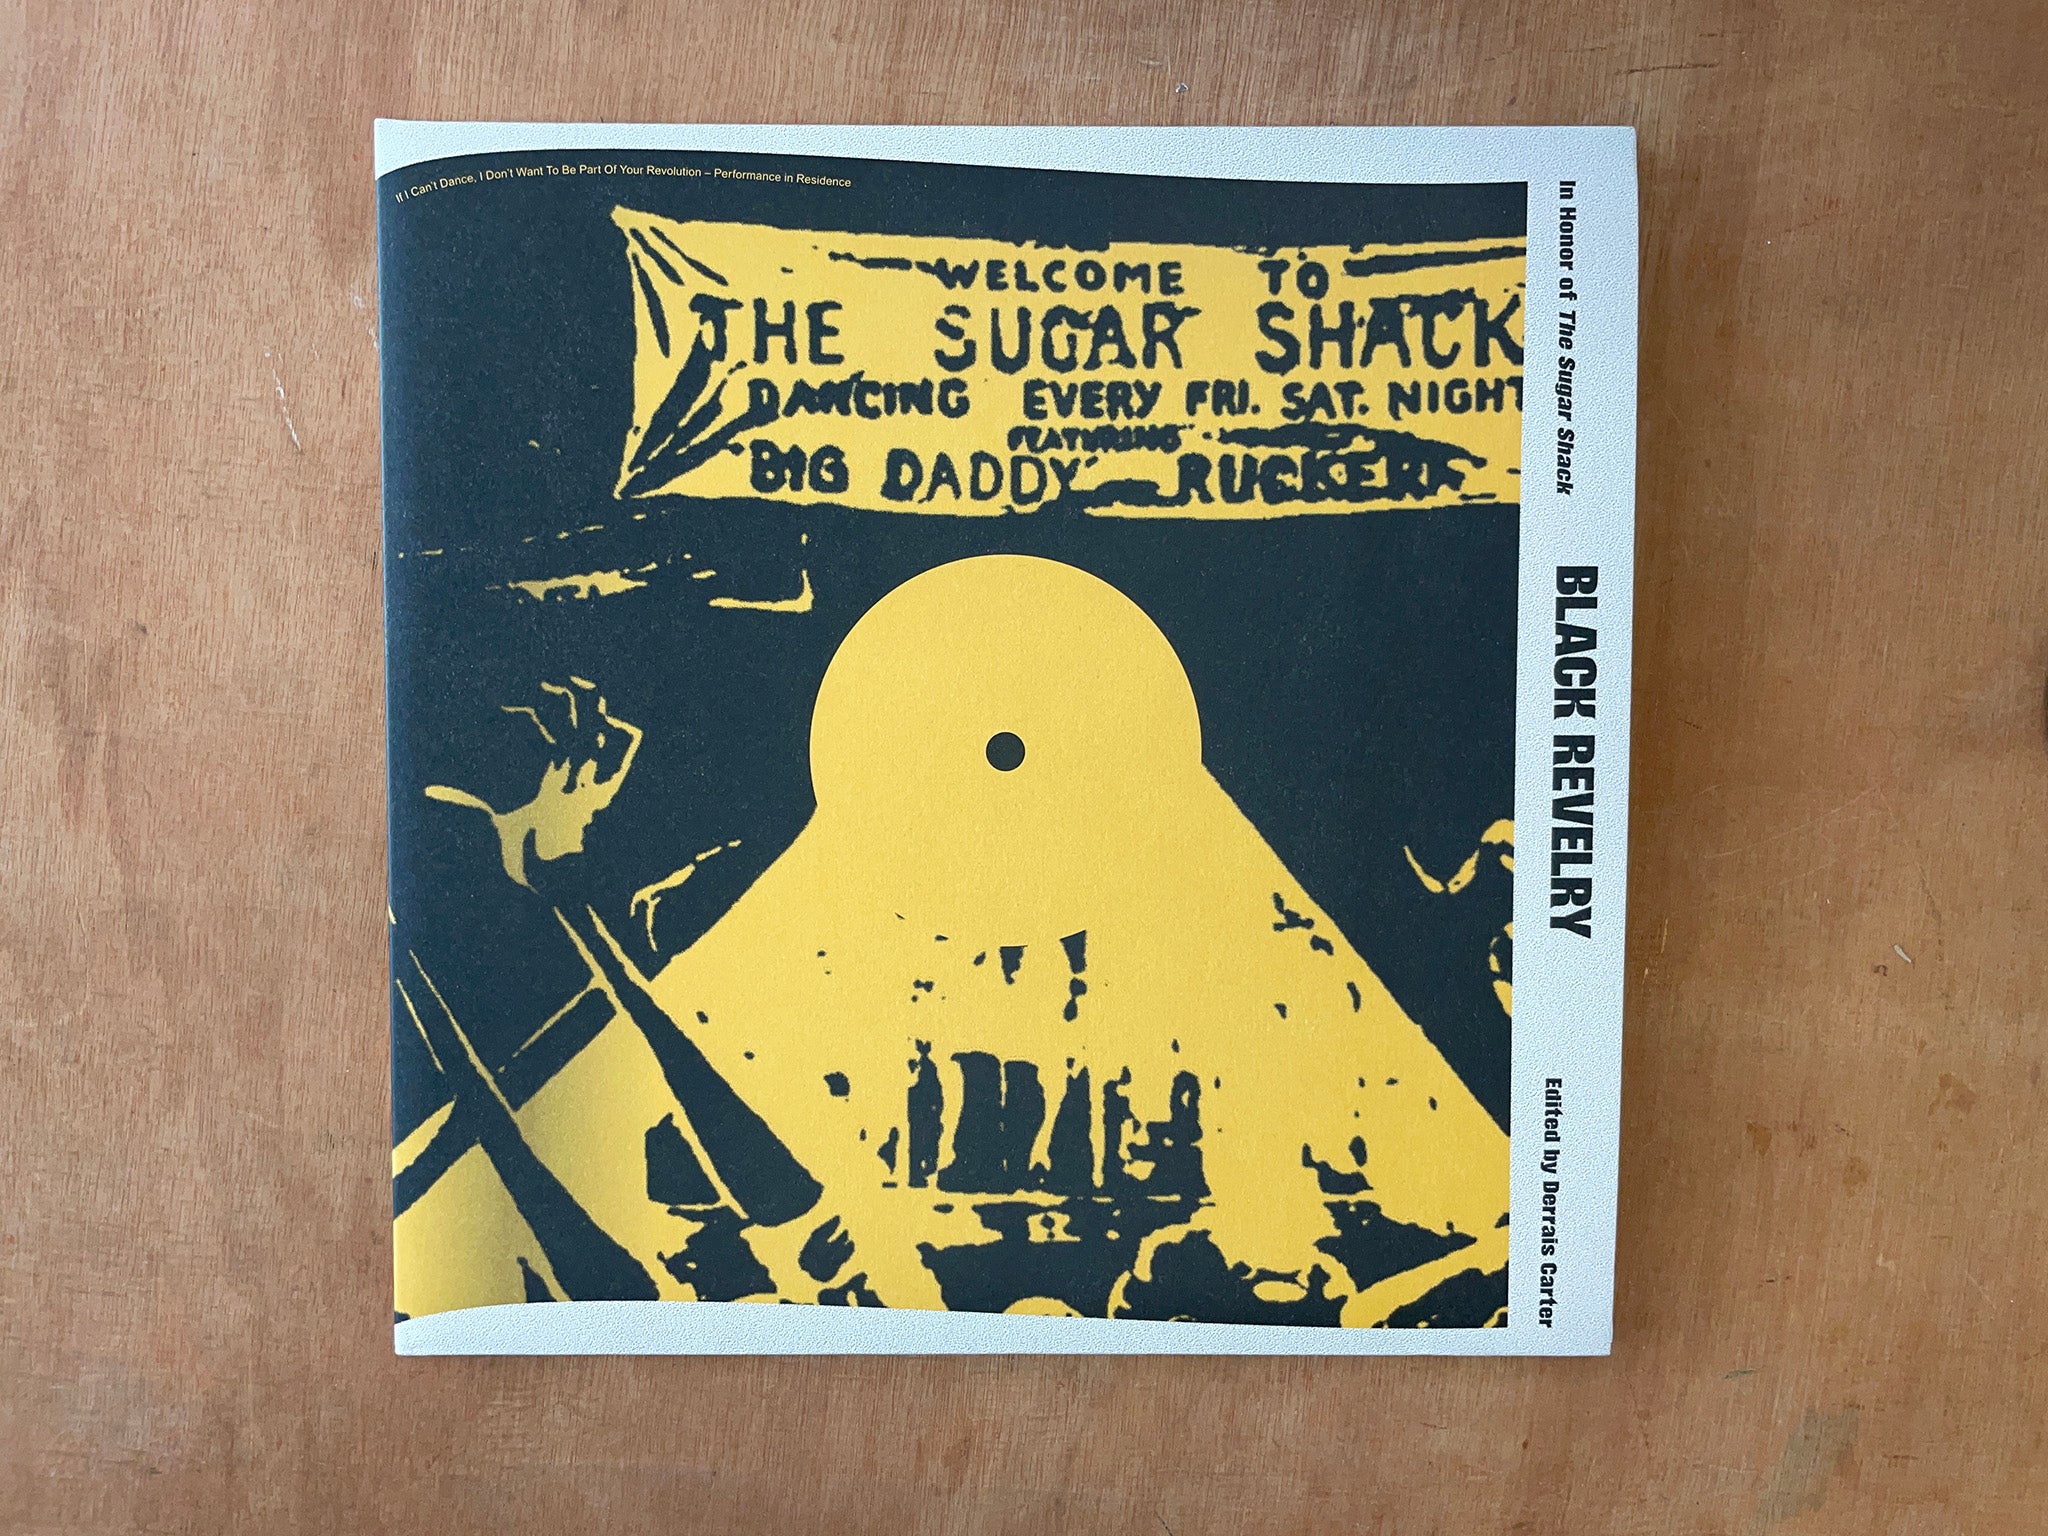 BLACK REVELRY: IN HONOR OF ‘THE SUGAR SHACK’ edited by D.A. Carter